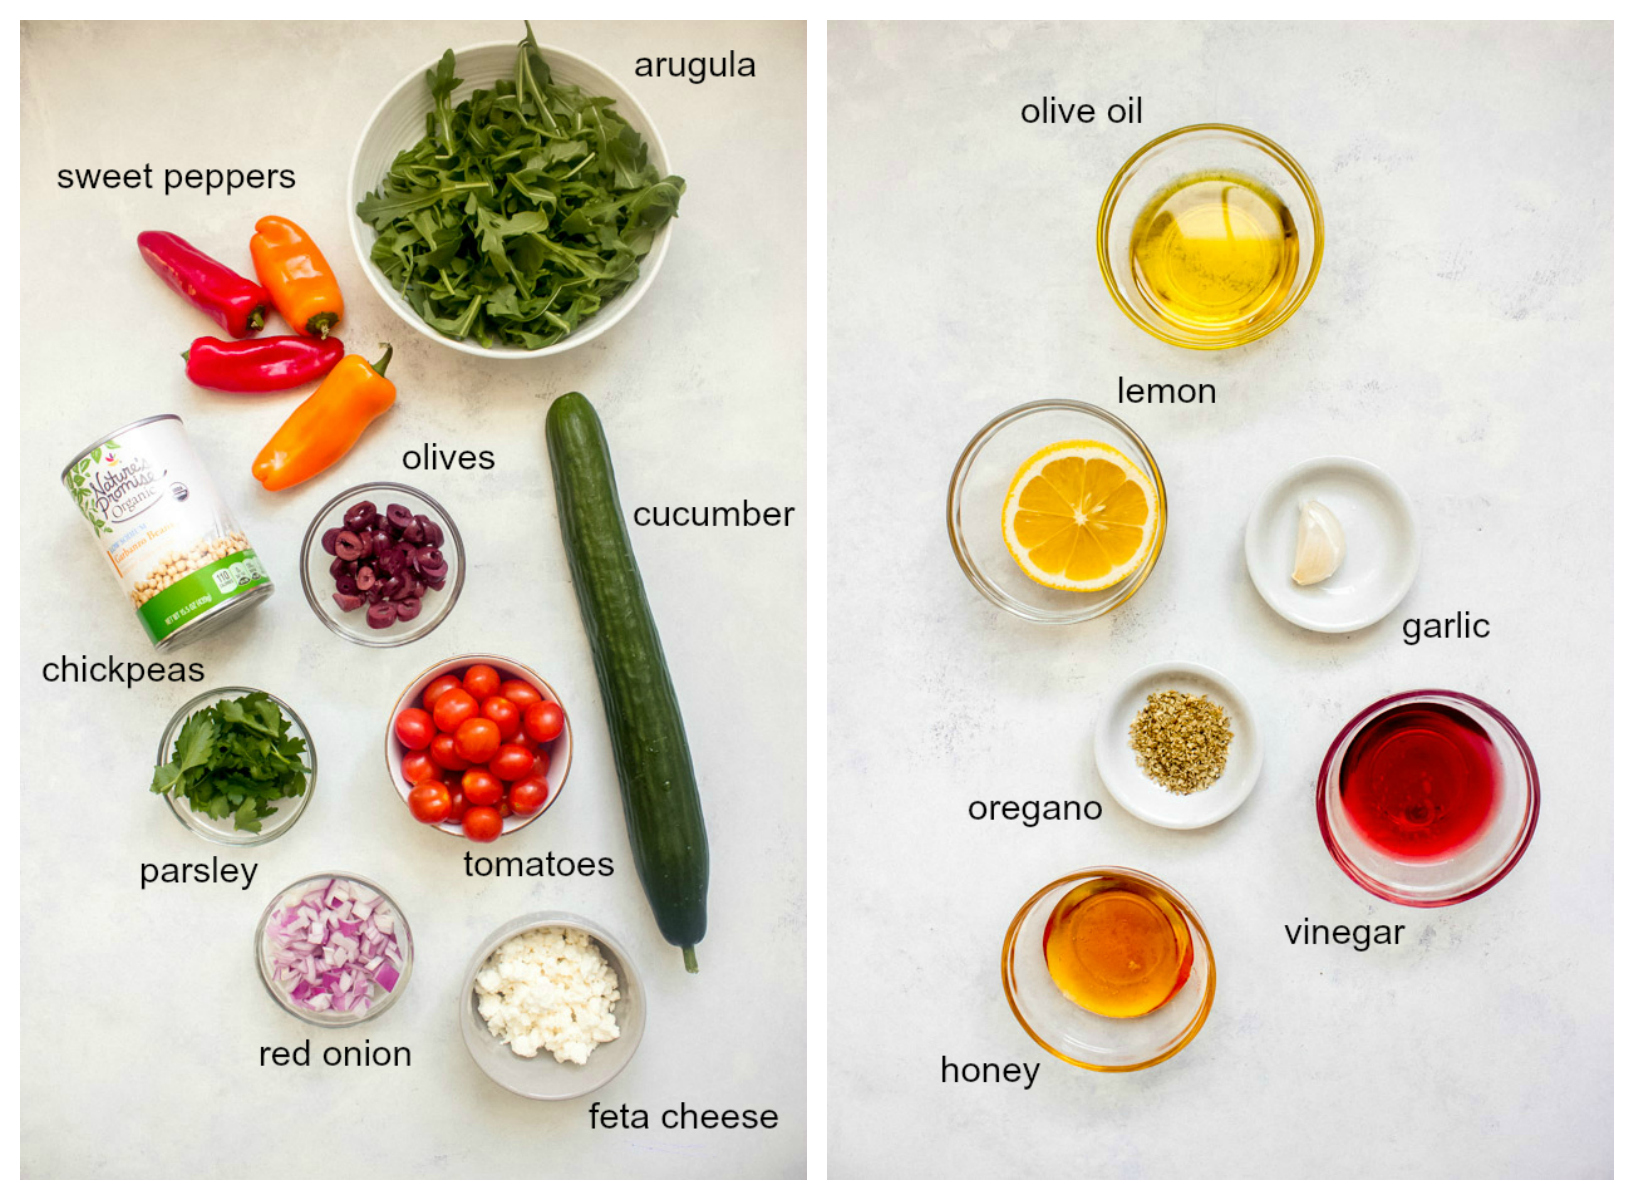 Ingredients for greek chickpea salad with arugula